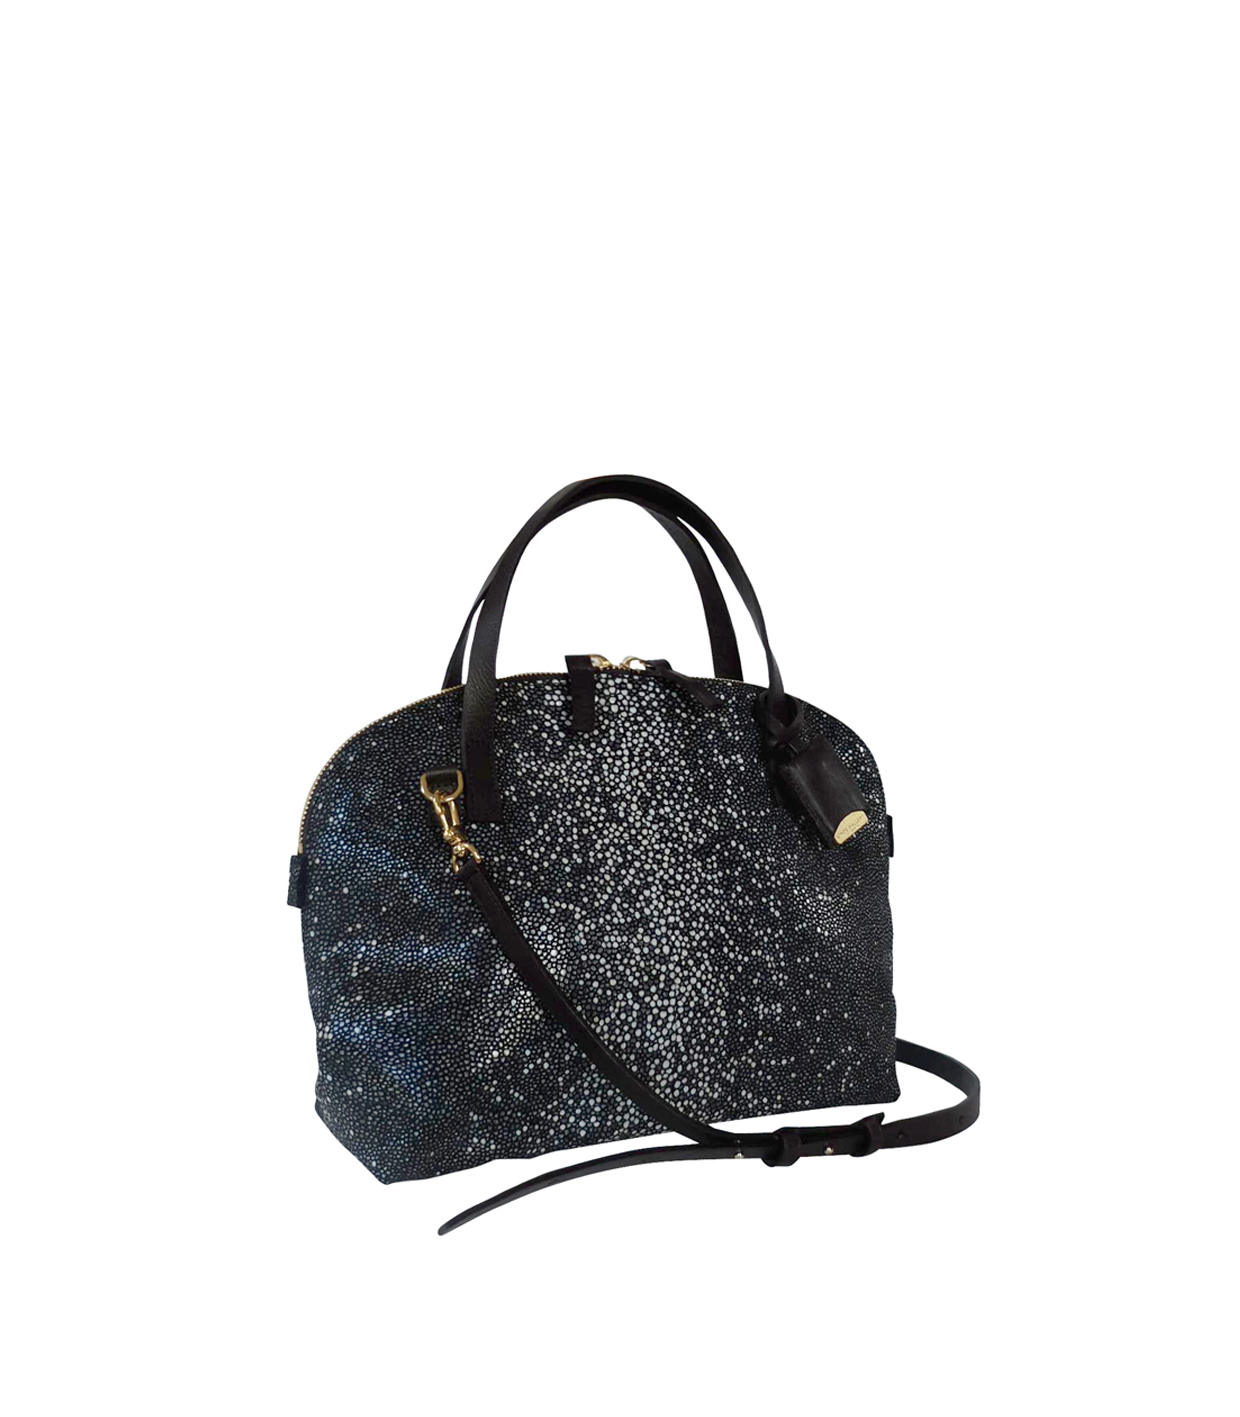 FLAMANDS XS - GALUCHAT, PRINTED SUEDE - BLACK — Linde Gallery St-Barth